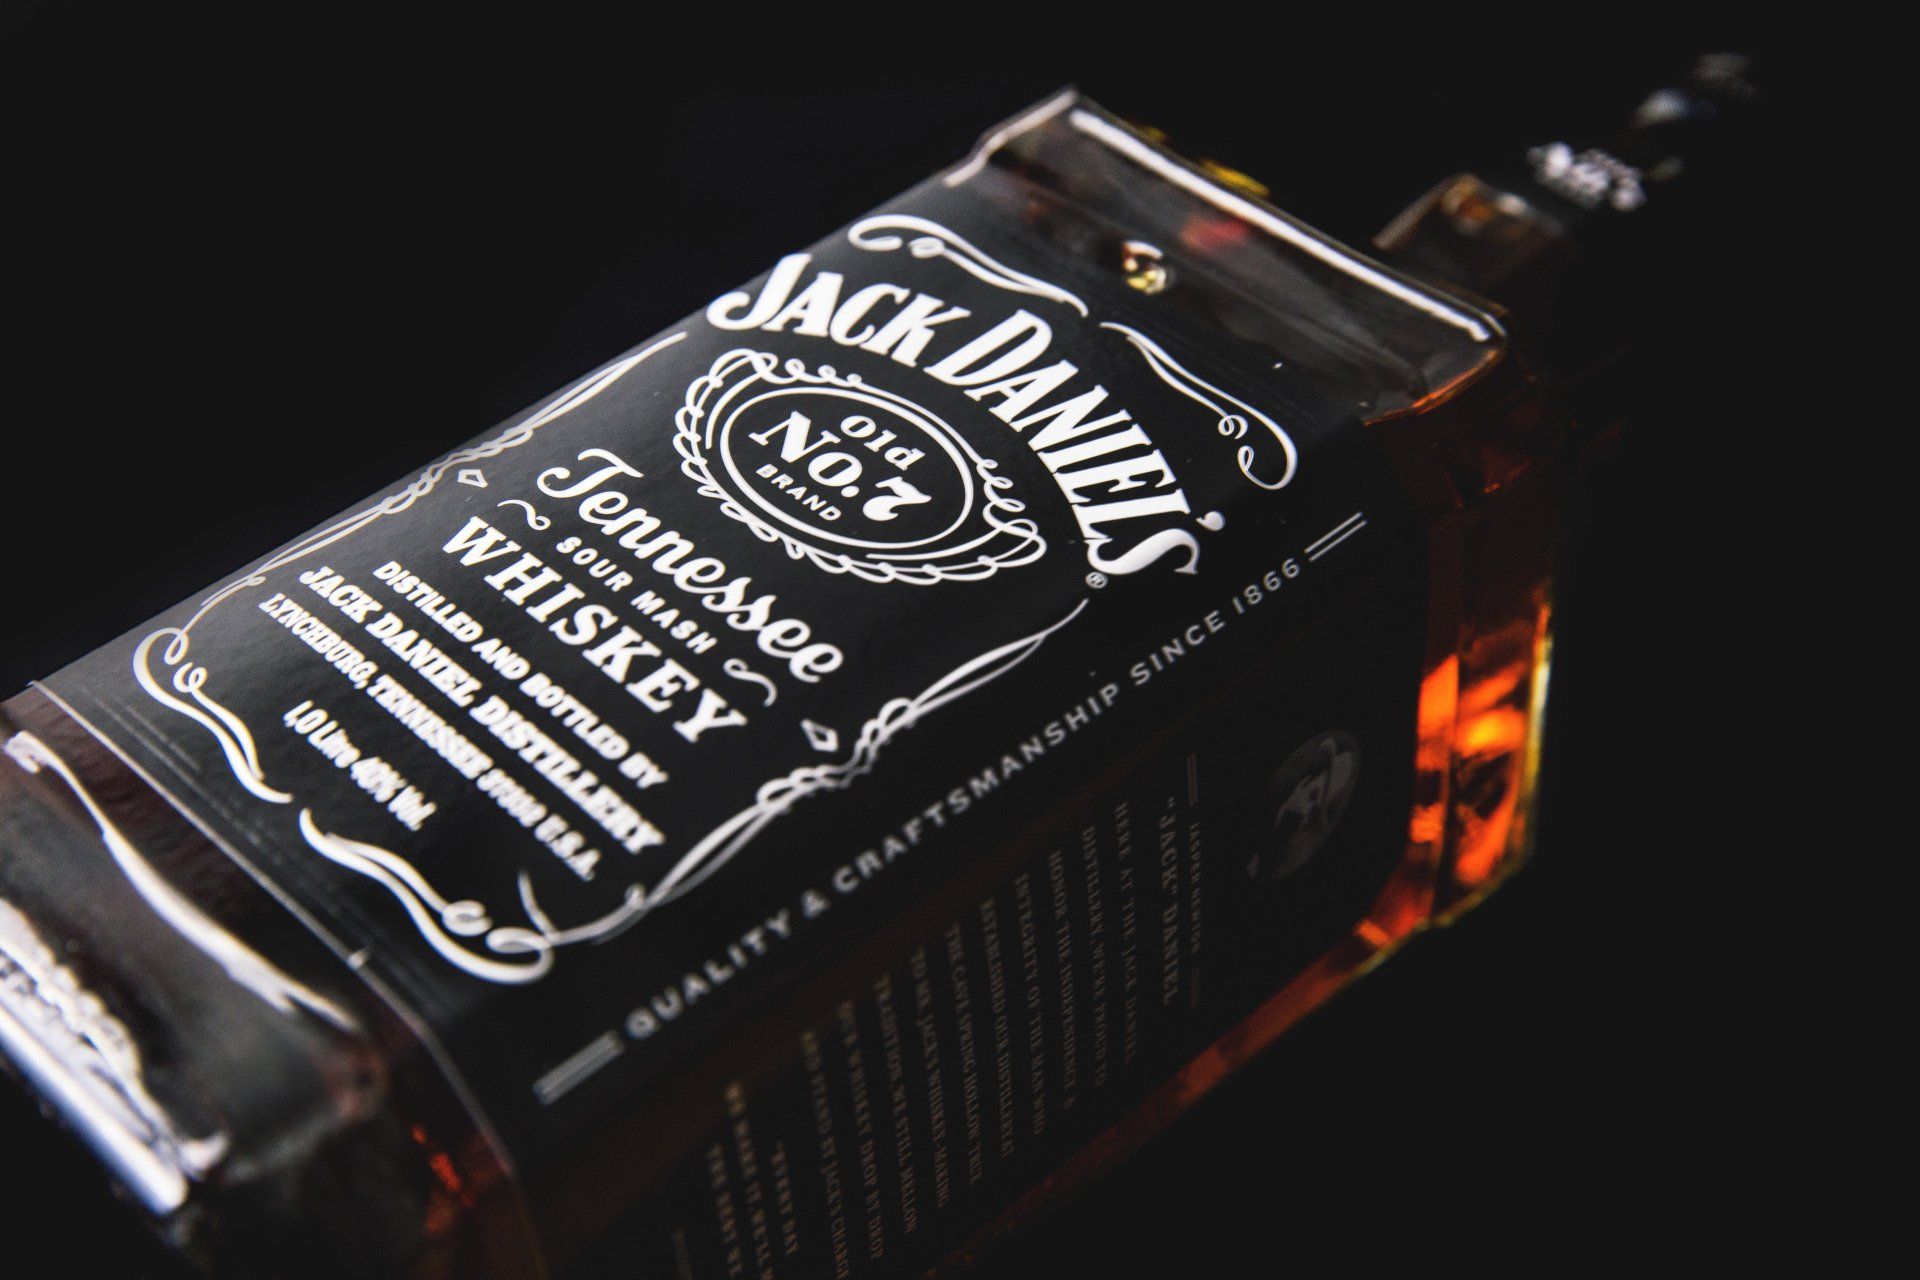 A bottle of jack daniel 's tennessee whiskey on a black background